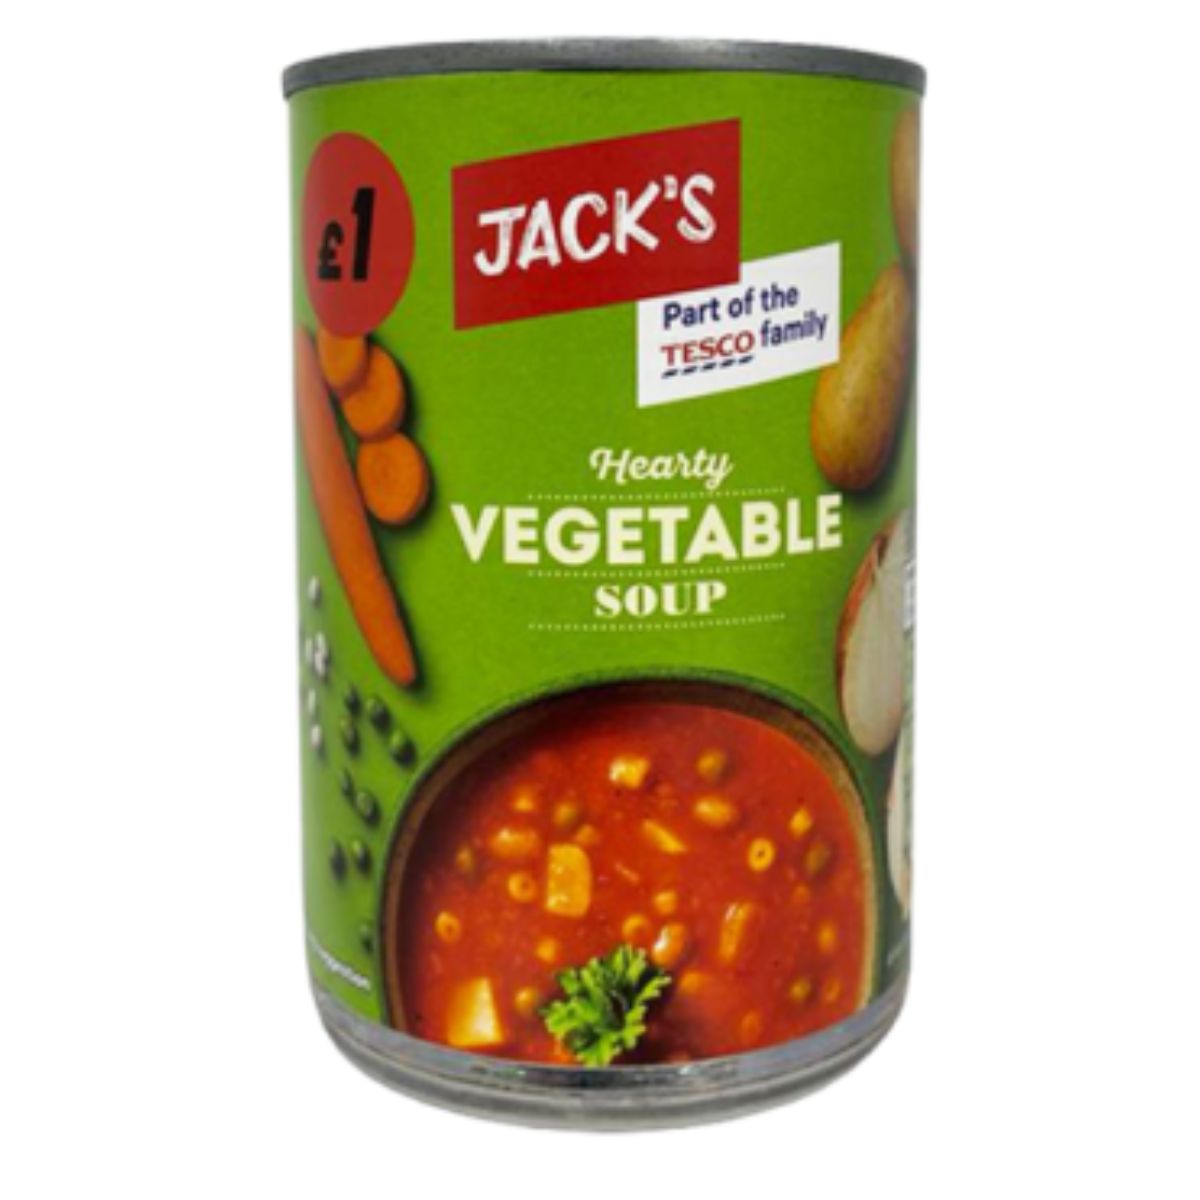 A can of Jacks - Hearty Vegetable Soup - 400g on a white background.